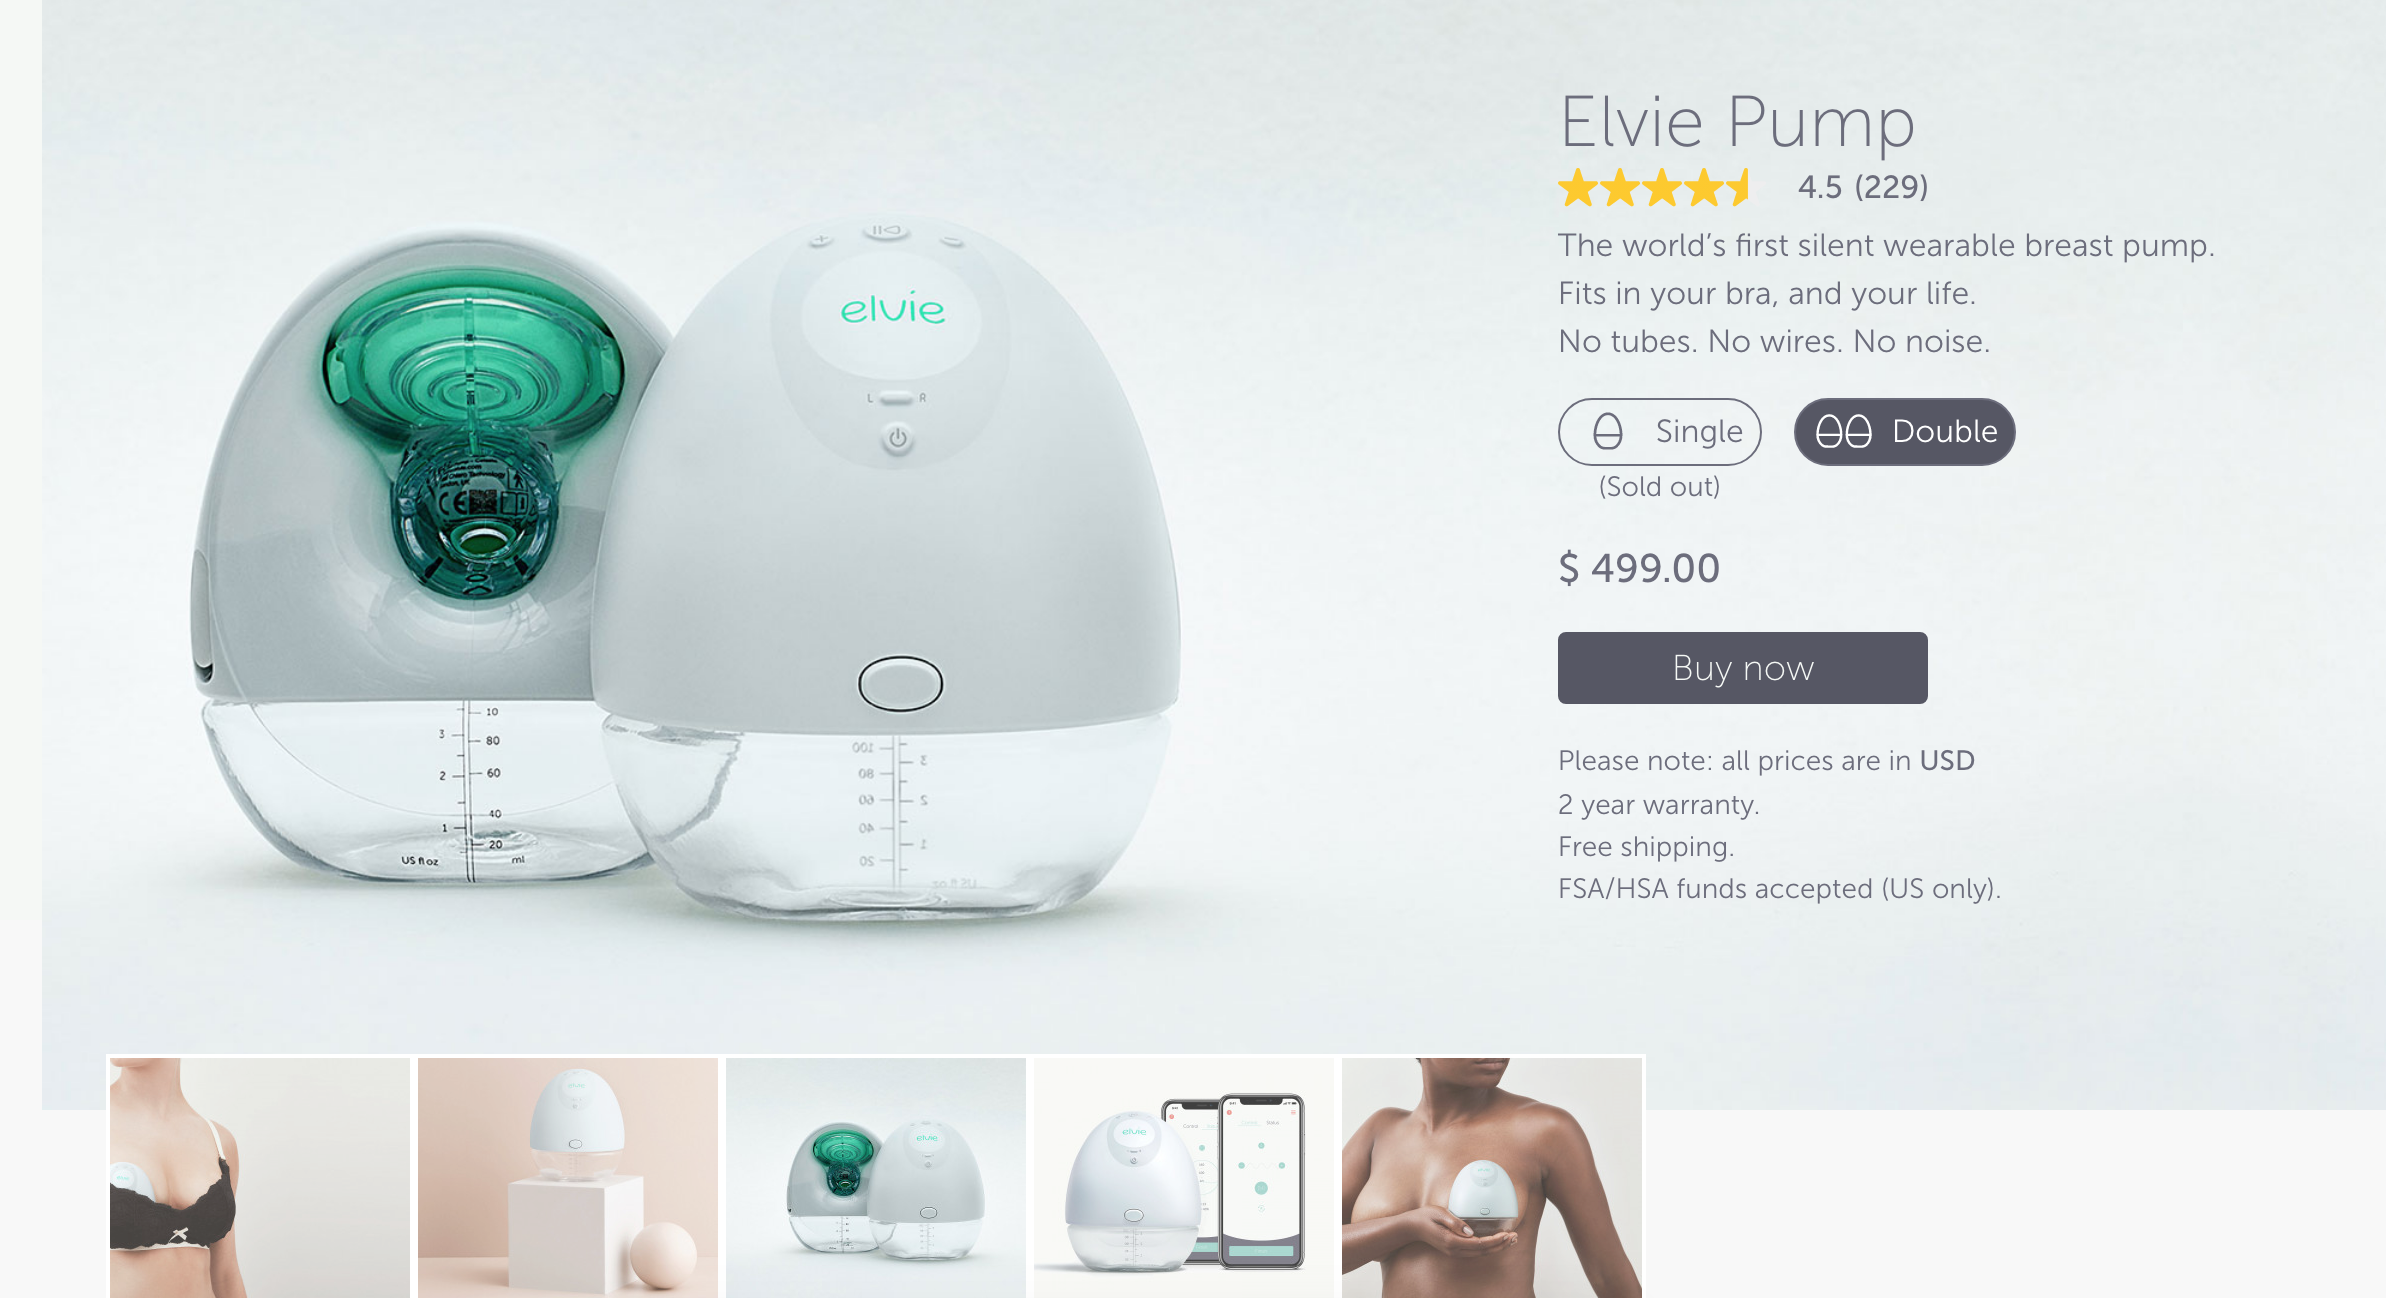 A Review on the Elvie Pump